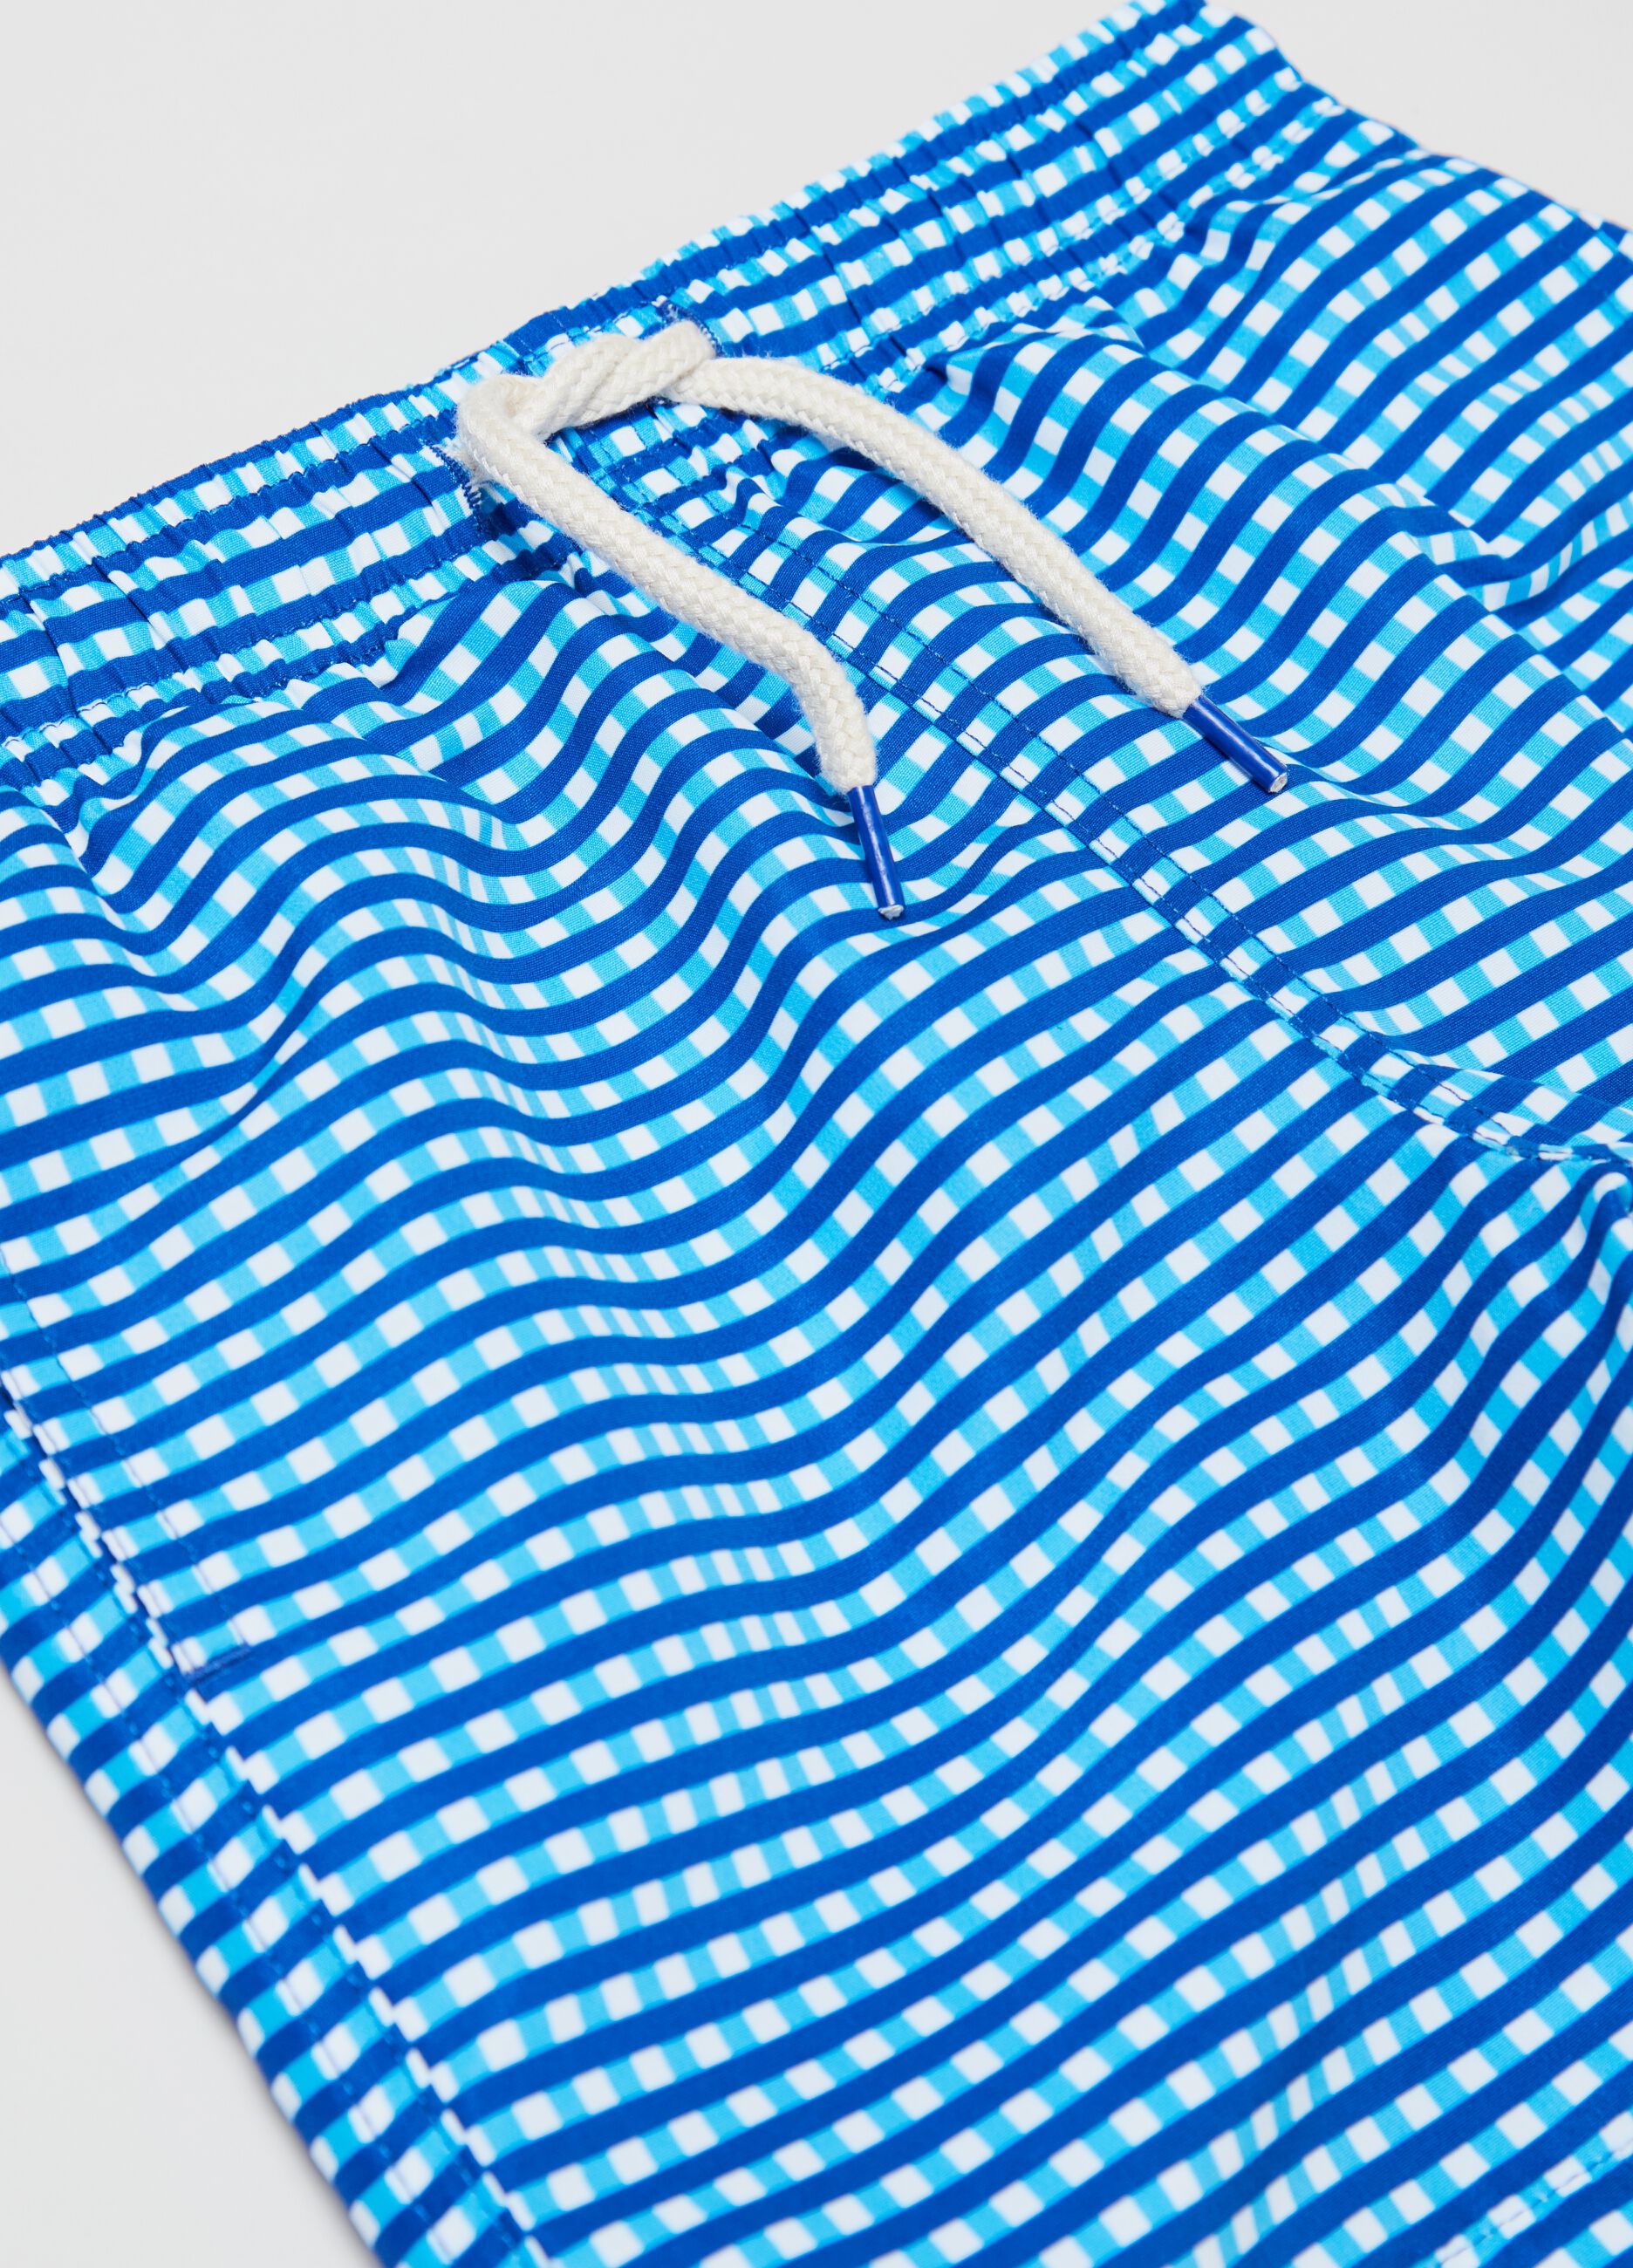 Swimming trunks with gingham pattern